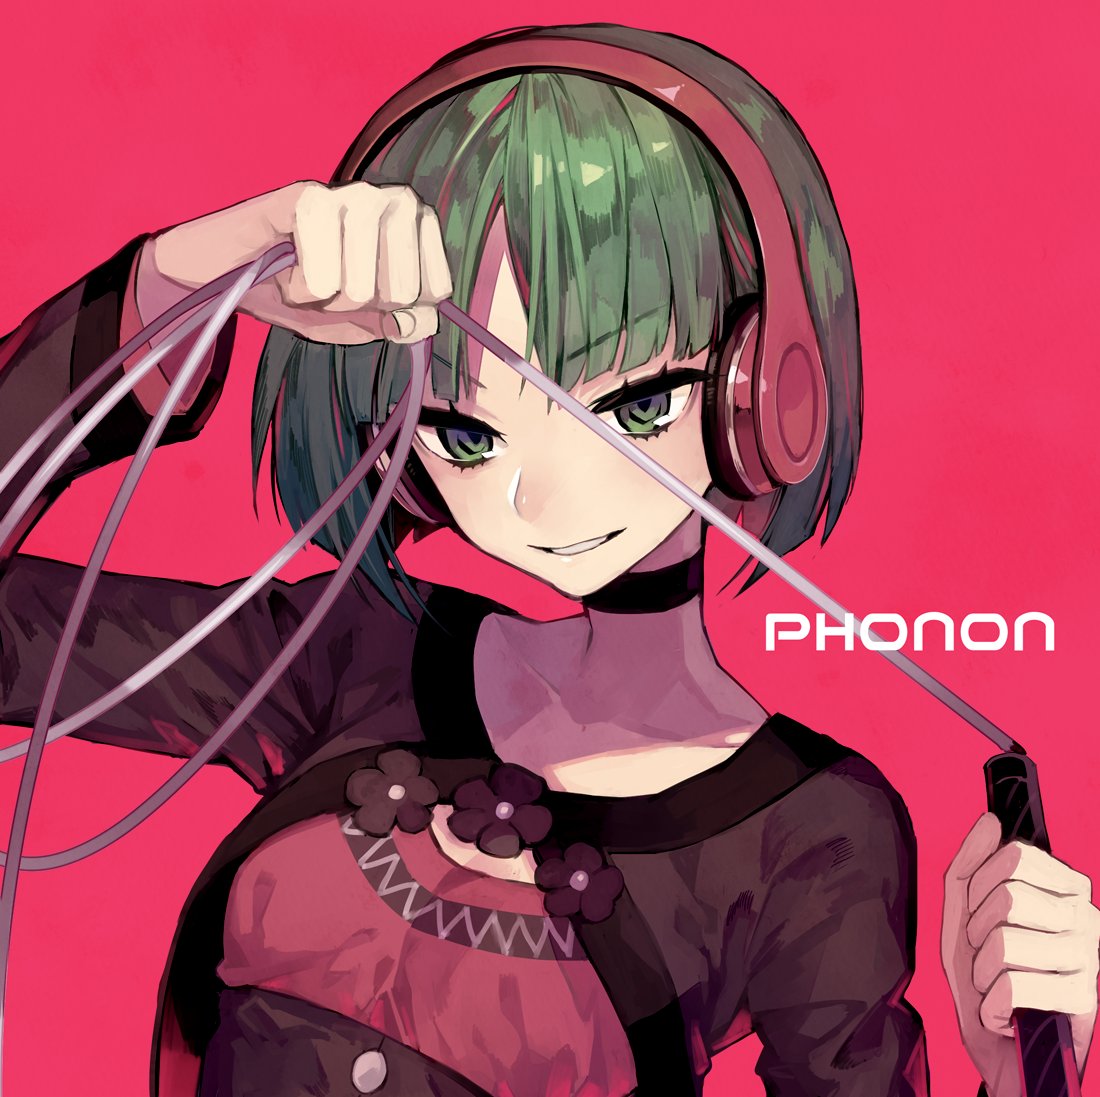 &gt;:) 1girl character_name choker cropped_jacket eyebrows_visible_through_hair green_eyes green_hair headphones parted_lips phonon_(under_night_in-birth) pink_background short_hair solo suzunashi under_night_in-birth upper_body whip